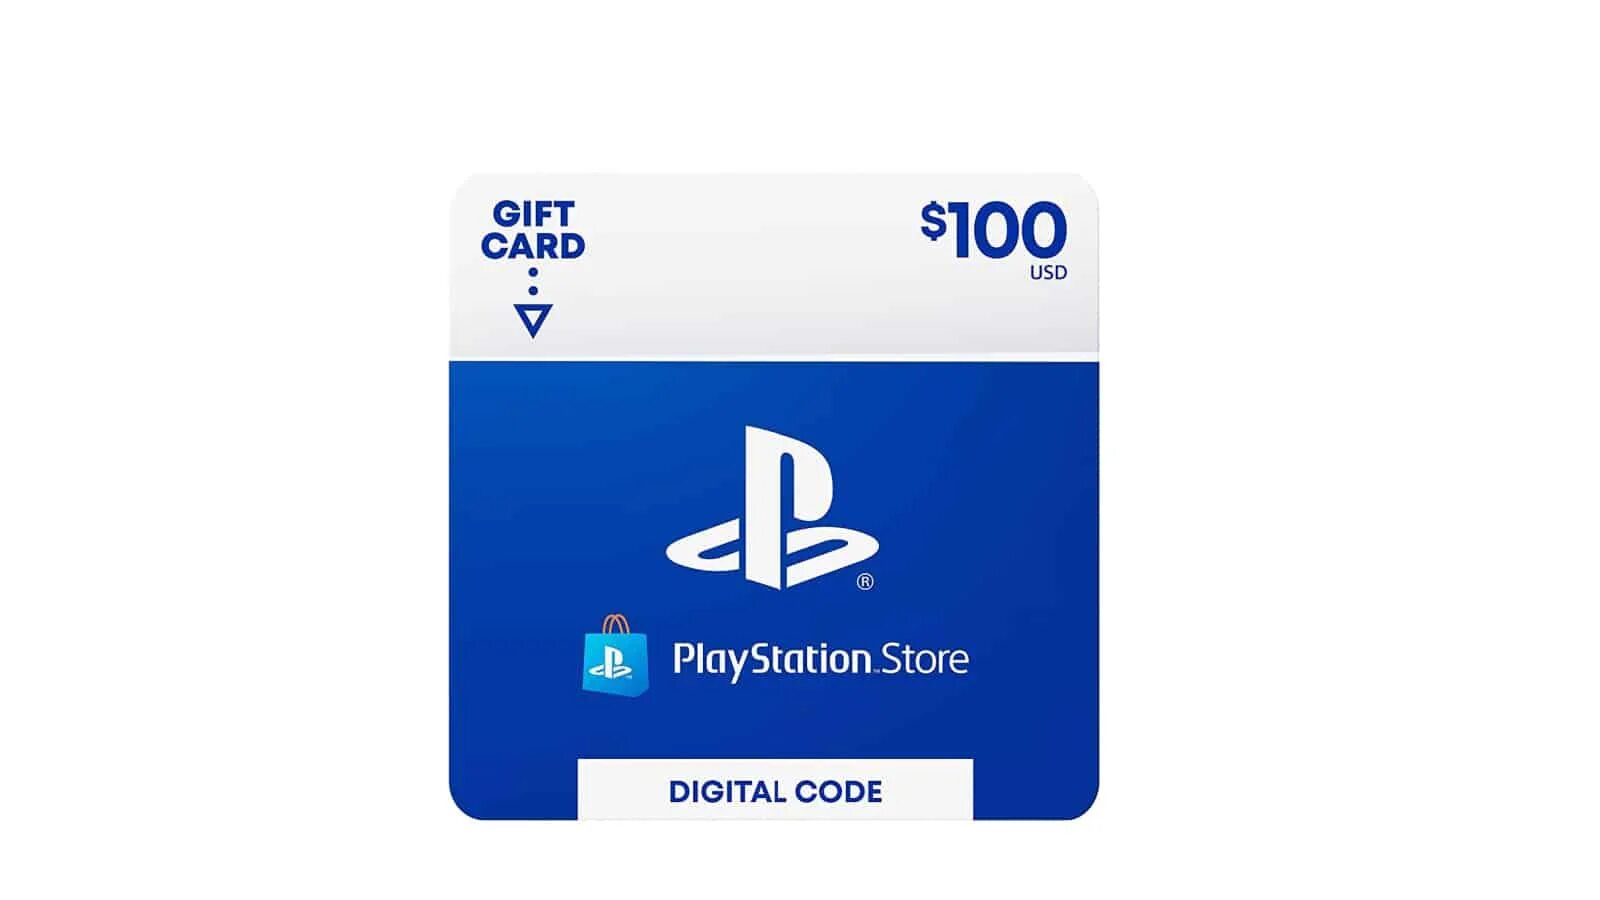 PLAYSTATION Store Card. PS Store Gift Card. PLAYSTATION Plus карточка пополнения. Карта пополнения PS Store. Купить карту пс